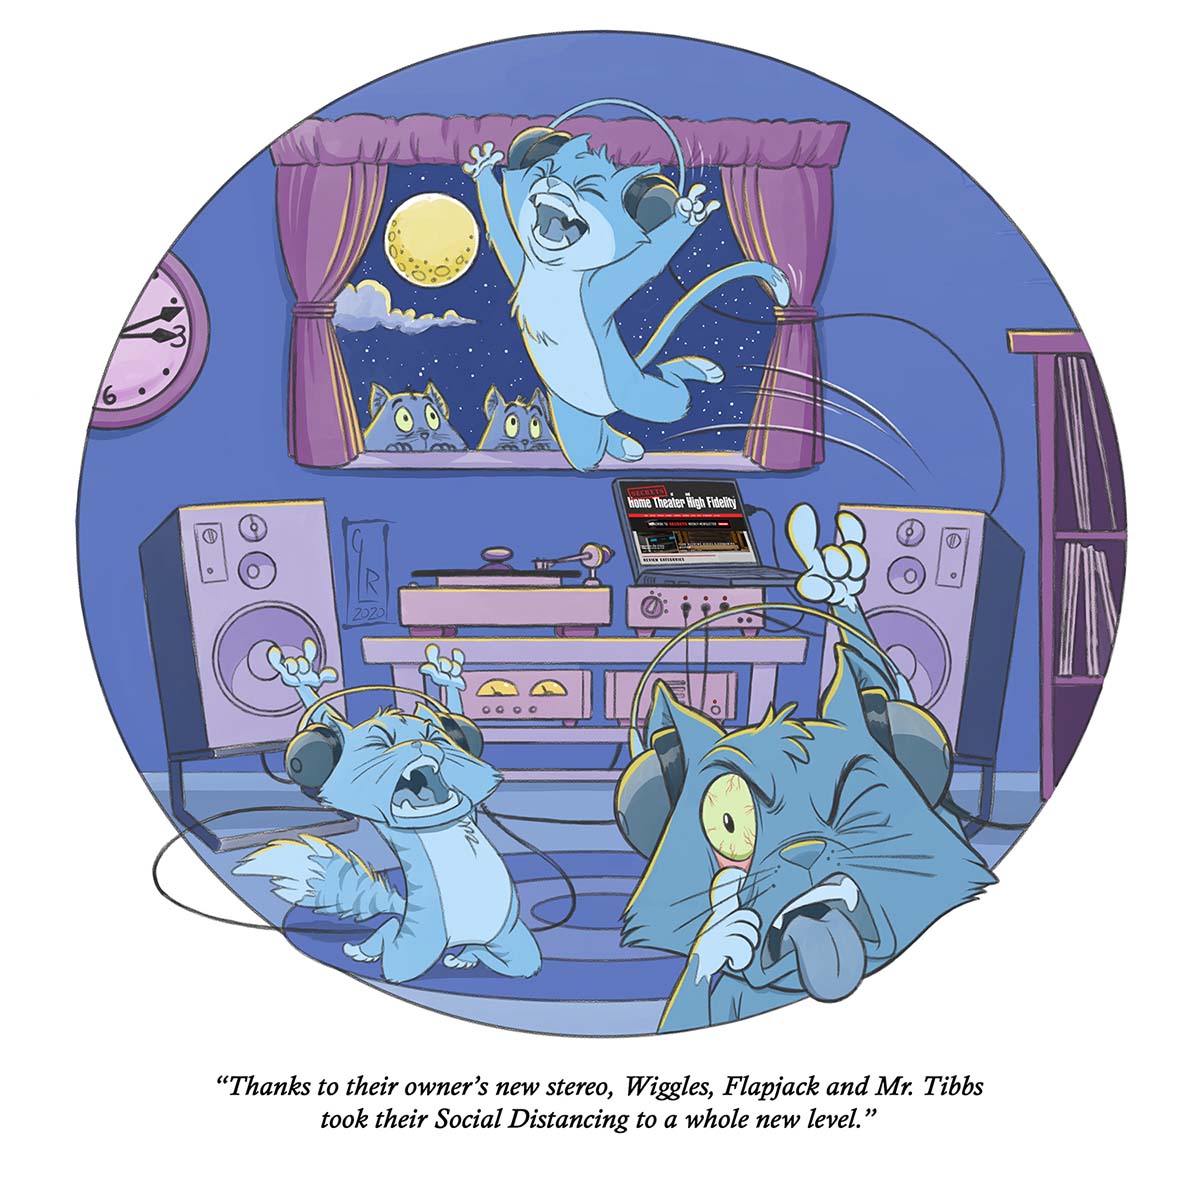 Comic illustration of 3 cats listening to music